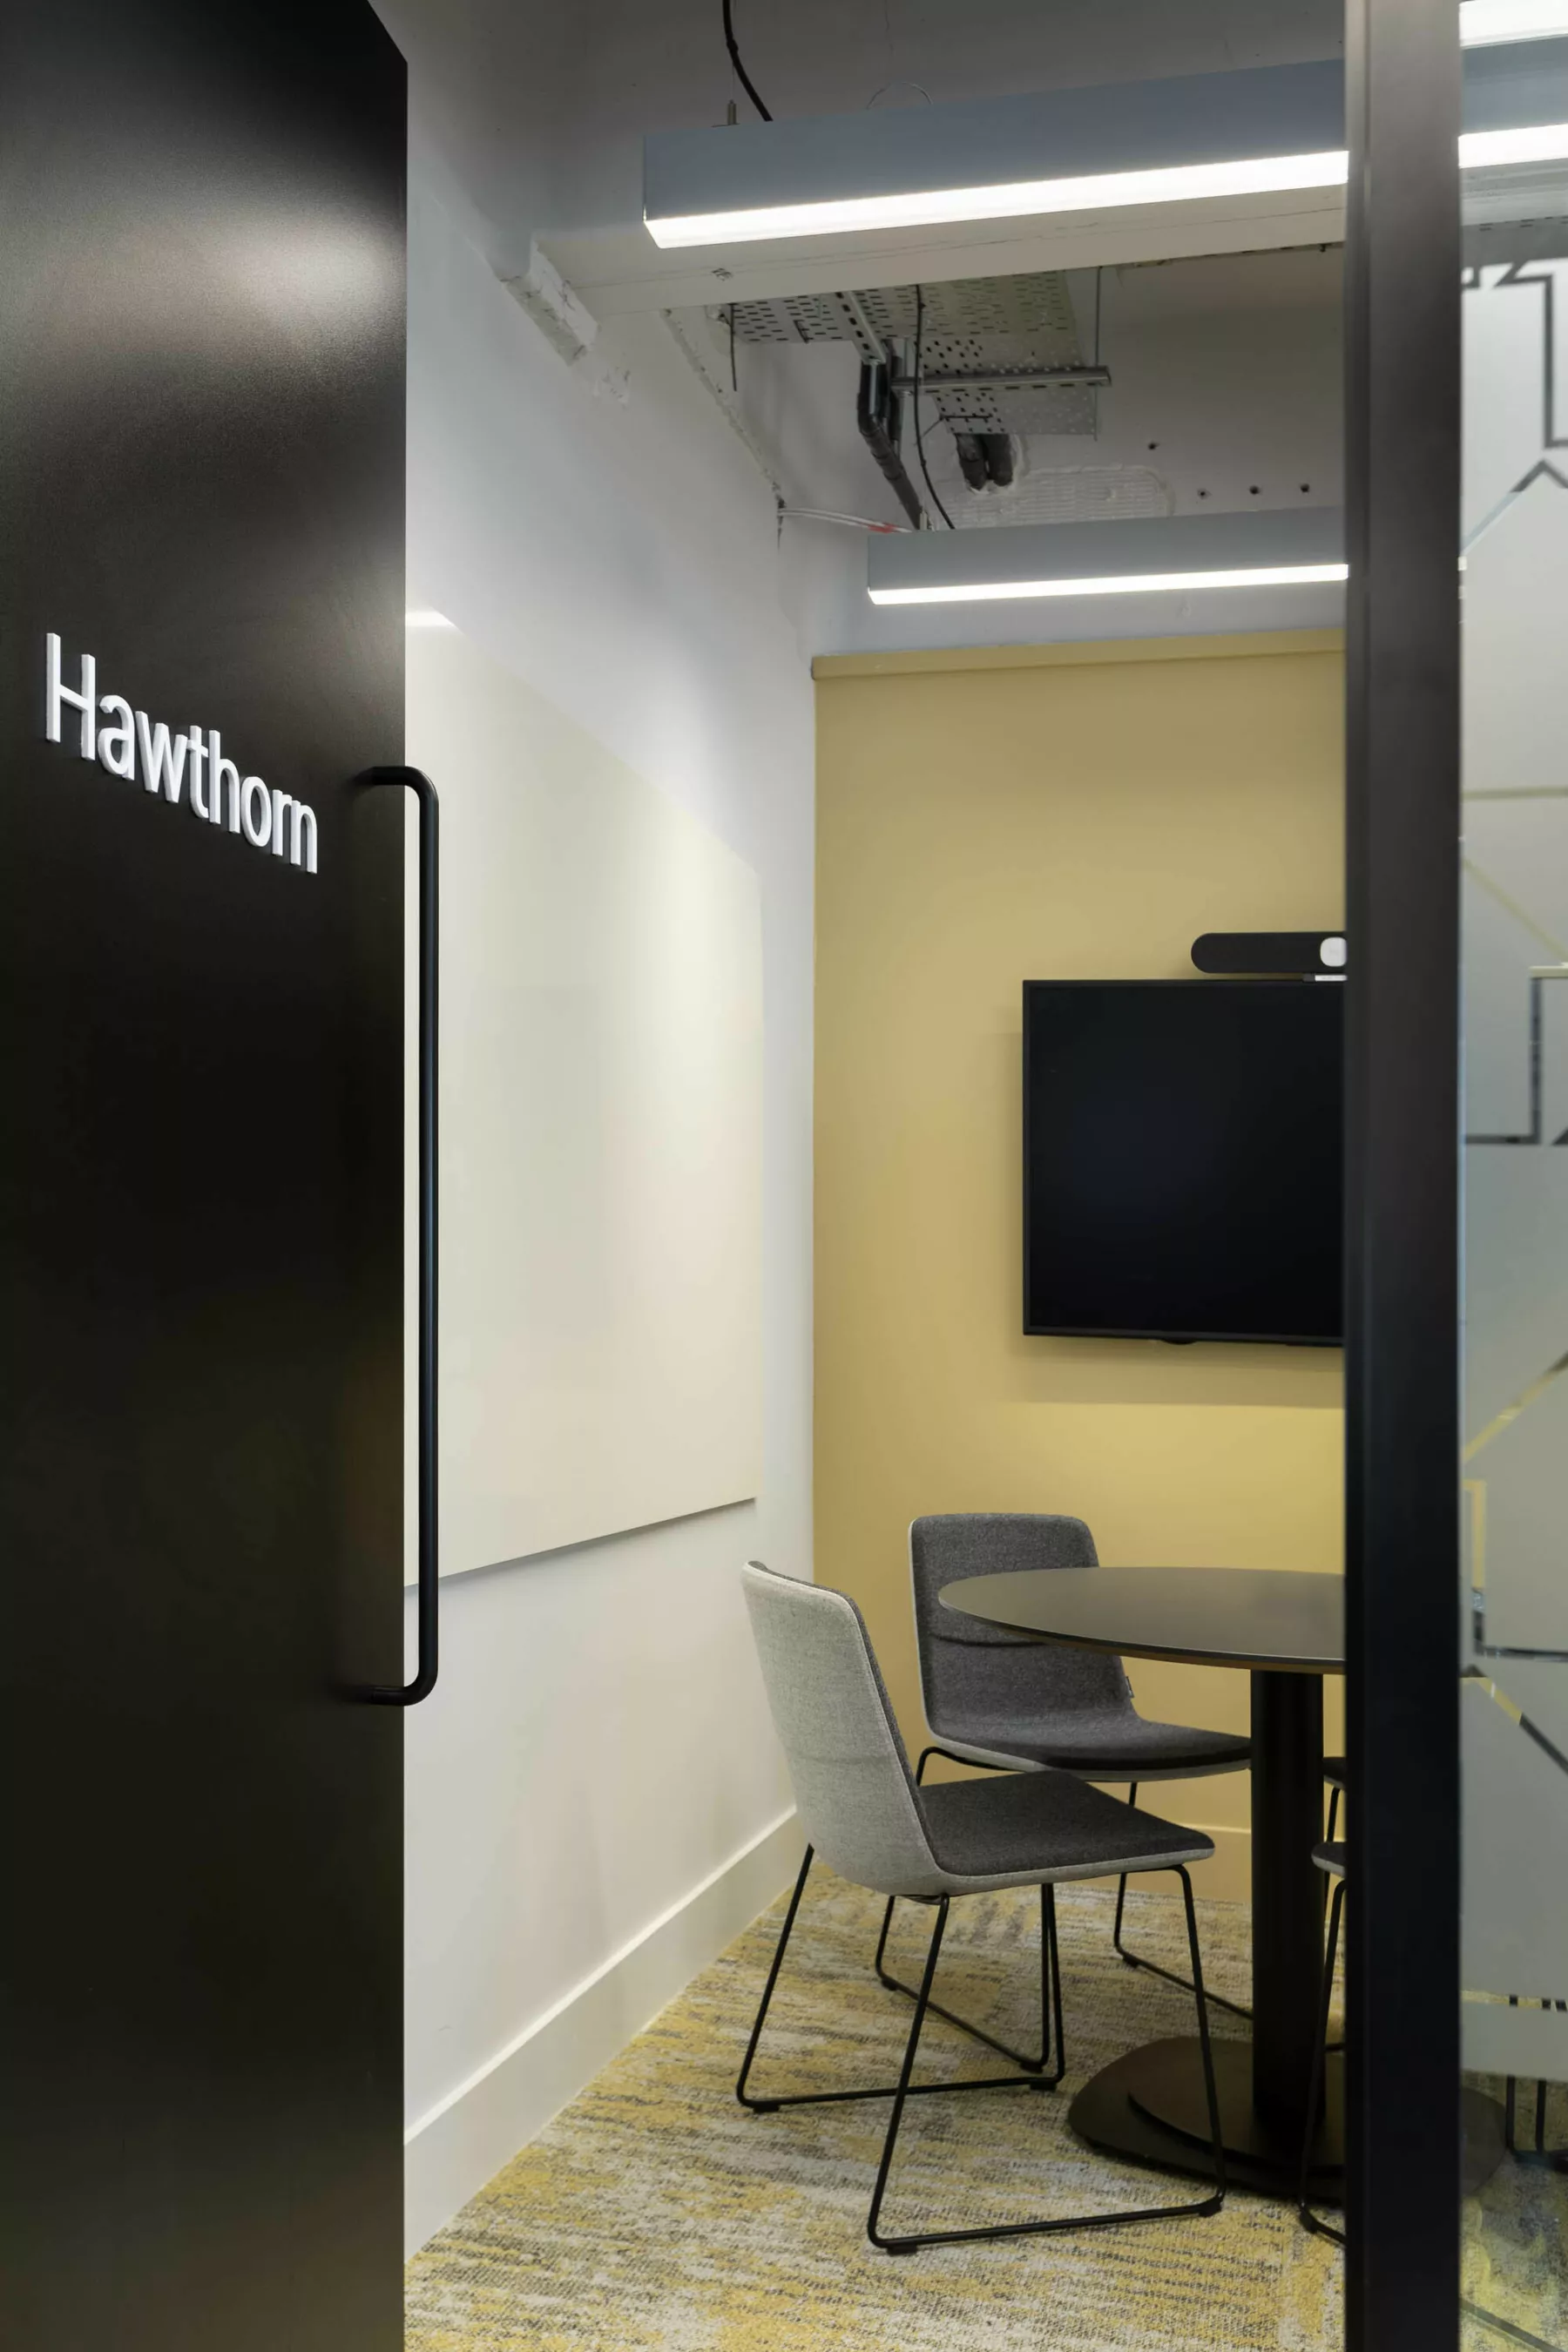 View into the 'Hawthorn' meeting room through an open door at the office newly refurbished for Changeworks, Edinburgh. A smartboard, screen and round meeting table.